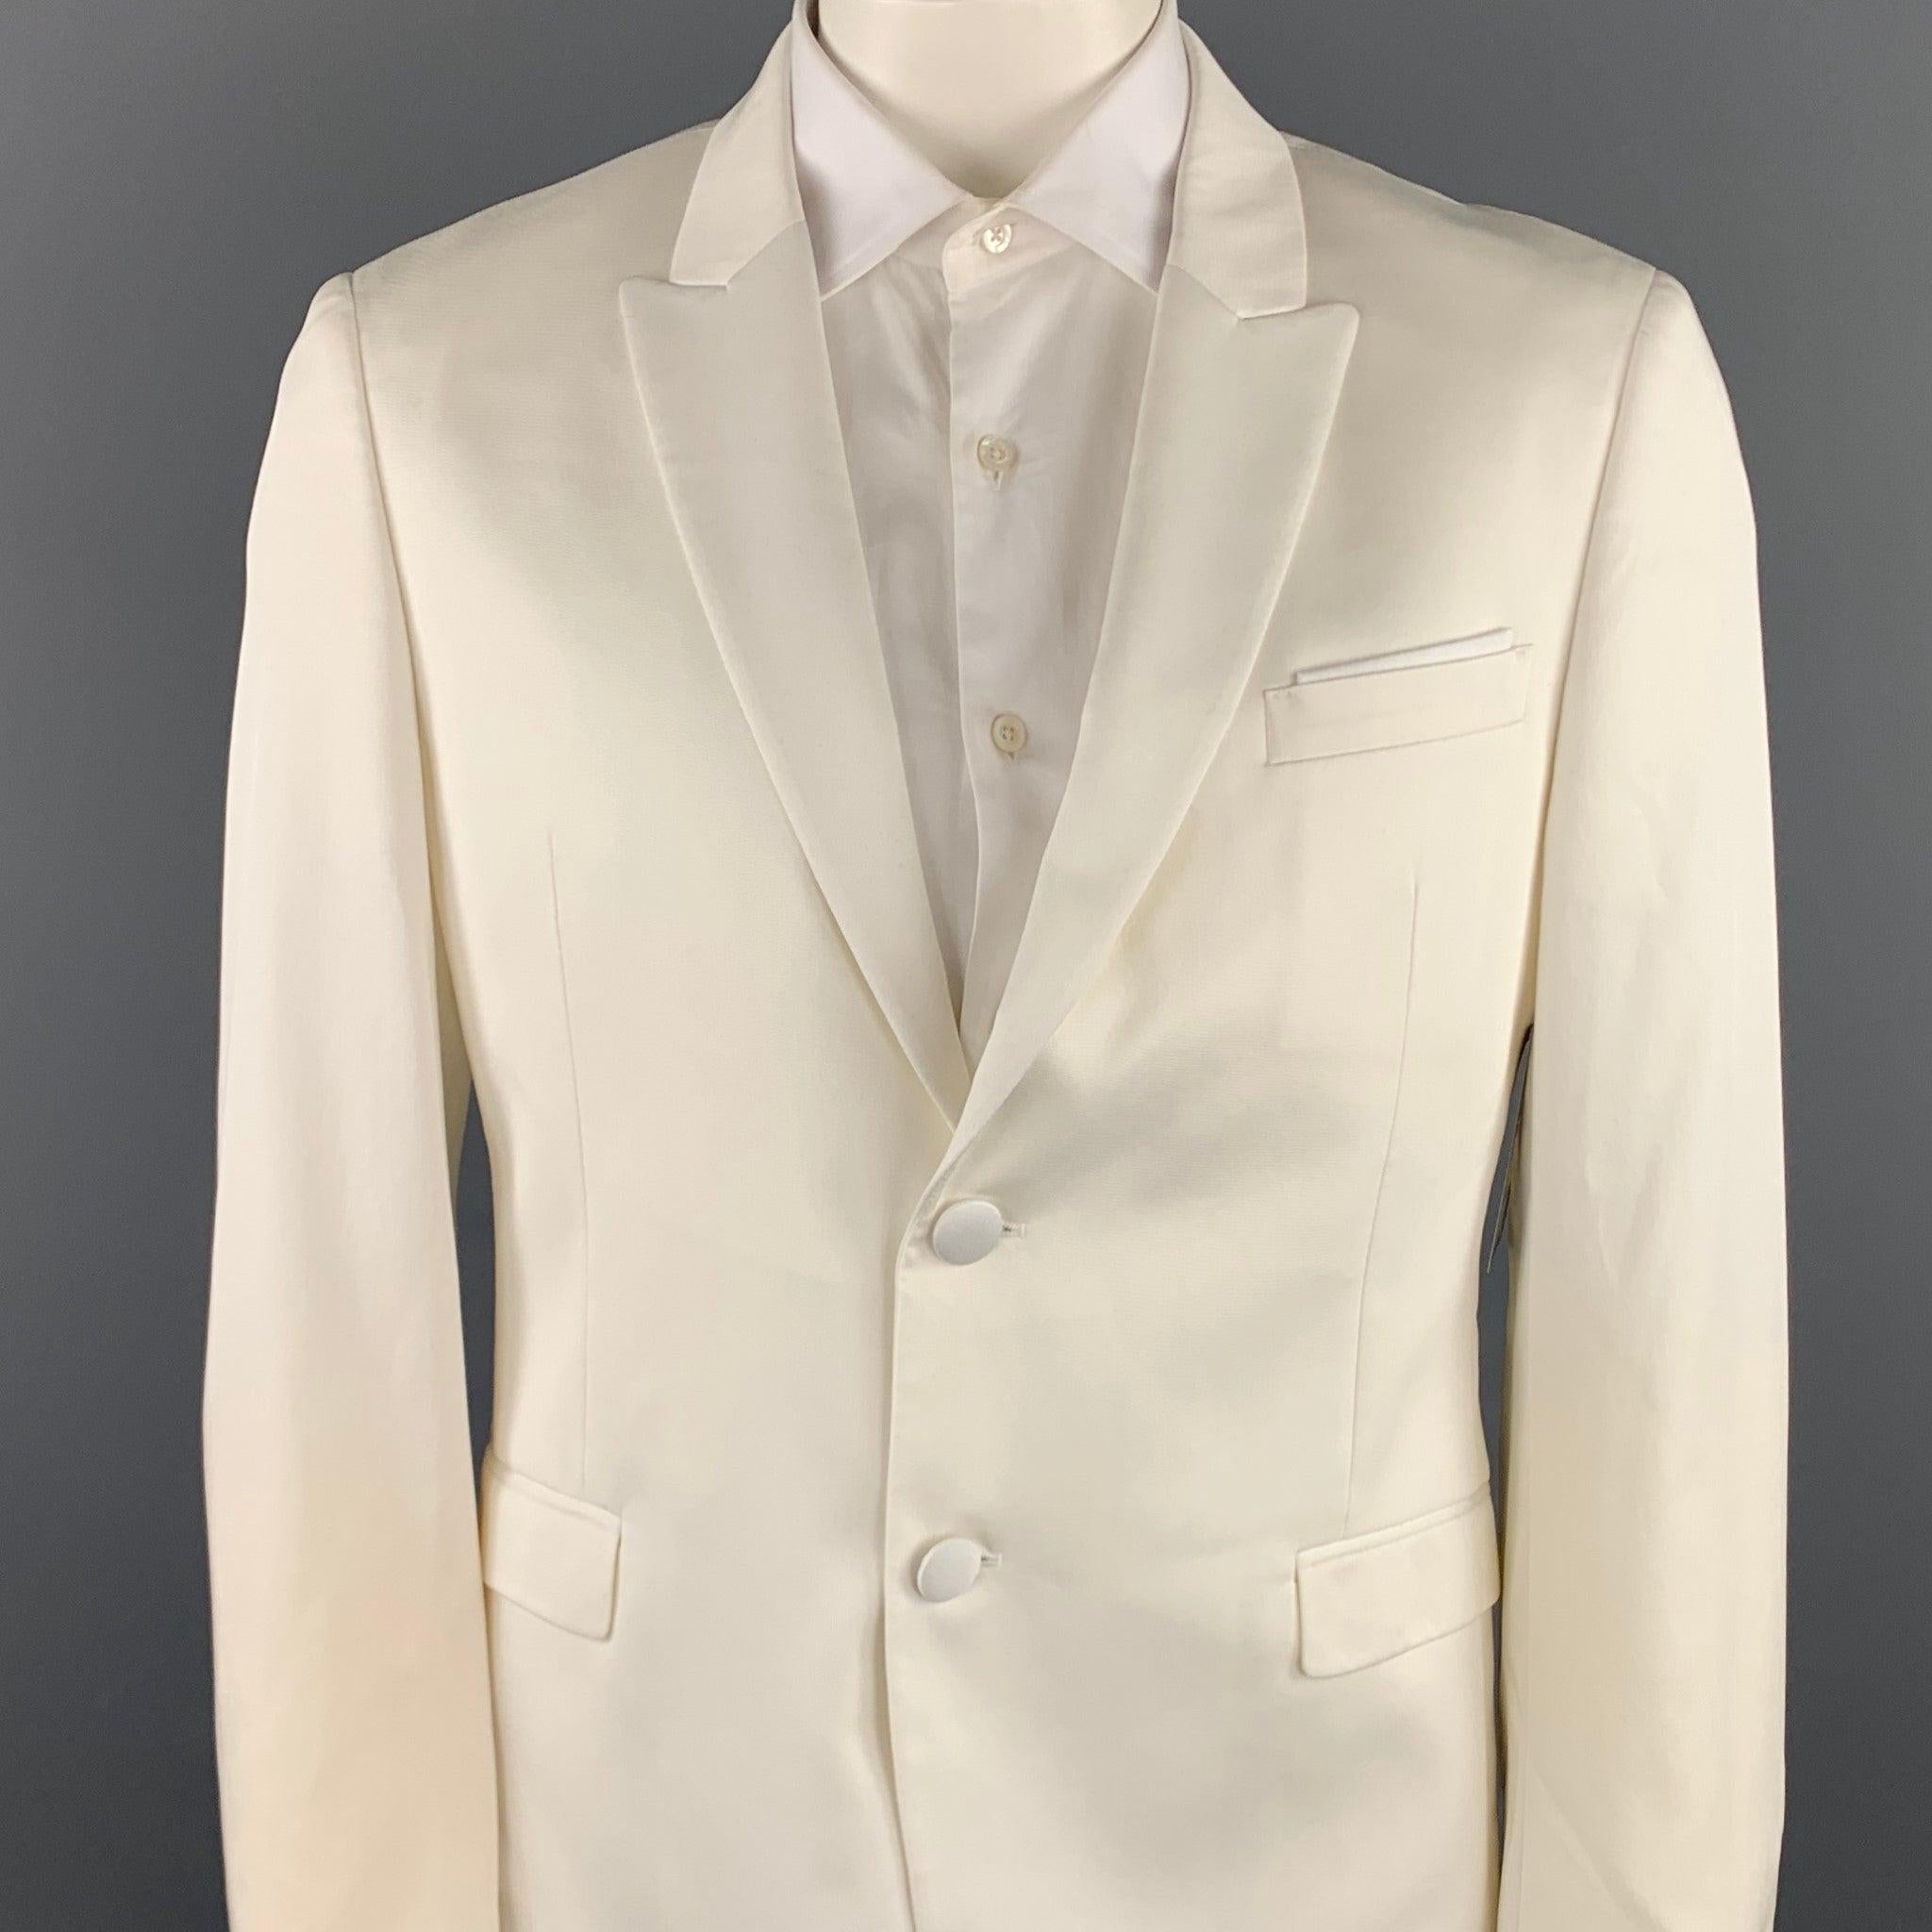 NEIL BARRETT sport coat comes in a white tencel blend with a full liner featuring a peak lapel, flap pockets, and a two button closure. Made in Italy.New With Tags. 

Marked:   IT 52 

Measurements: 
 
Shoulder: 18.5 inches 
Chest: 42 inches